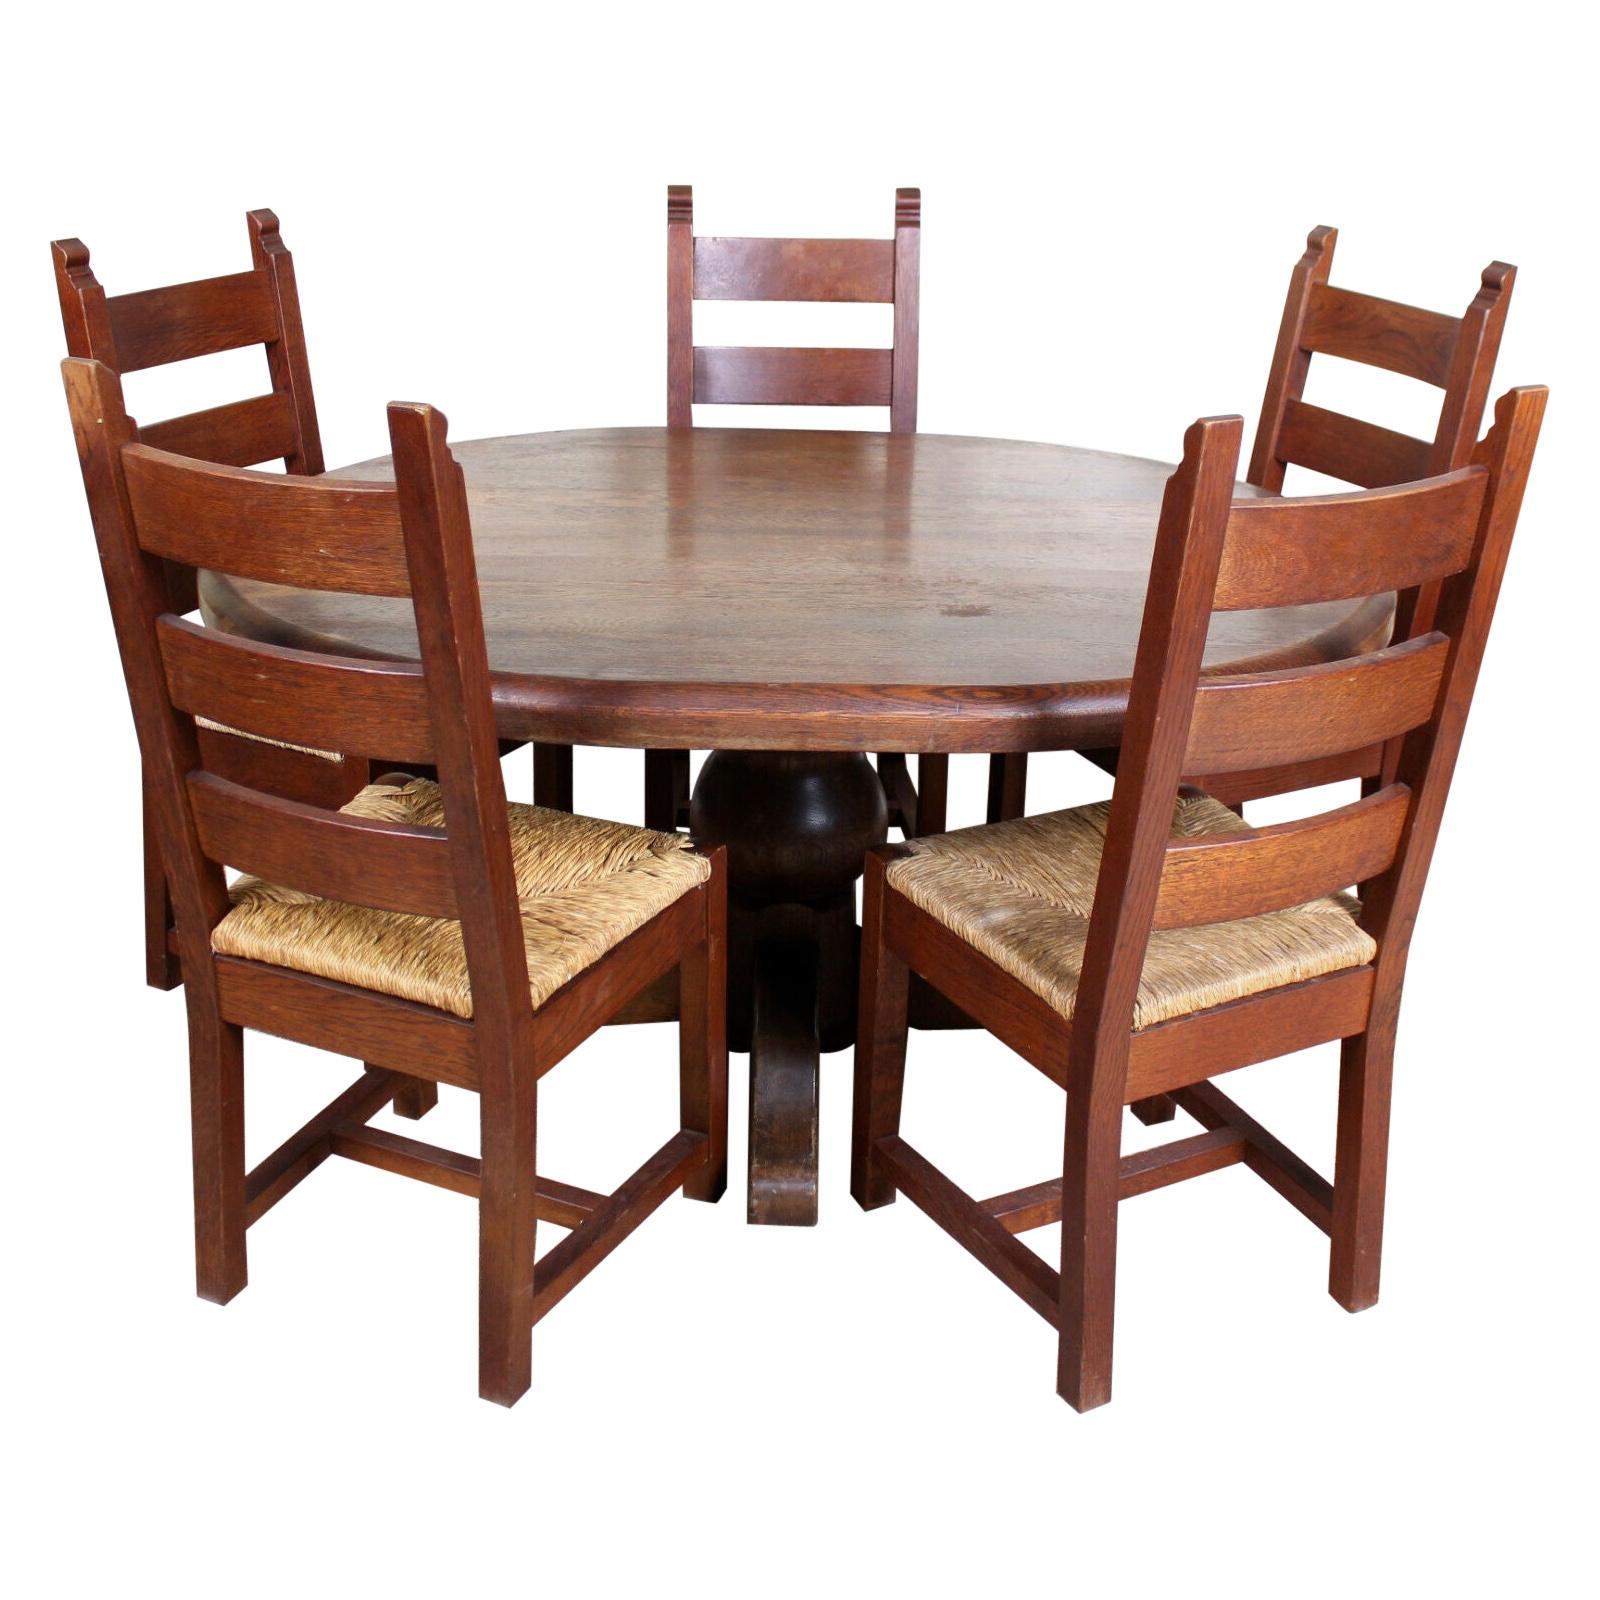 English Oak Dining Table and 5 Chairs Country Arts & Crafts Rustic Rush Country For Sale